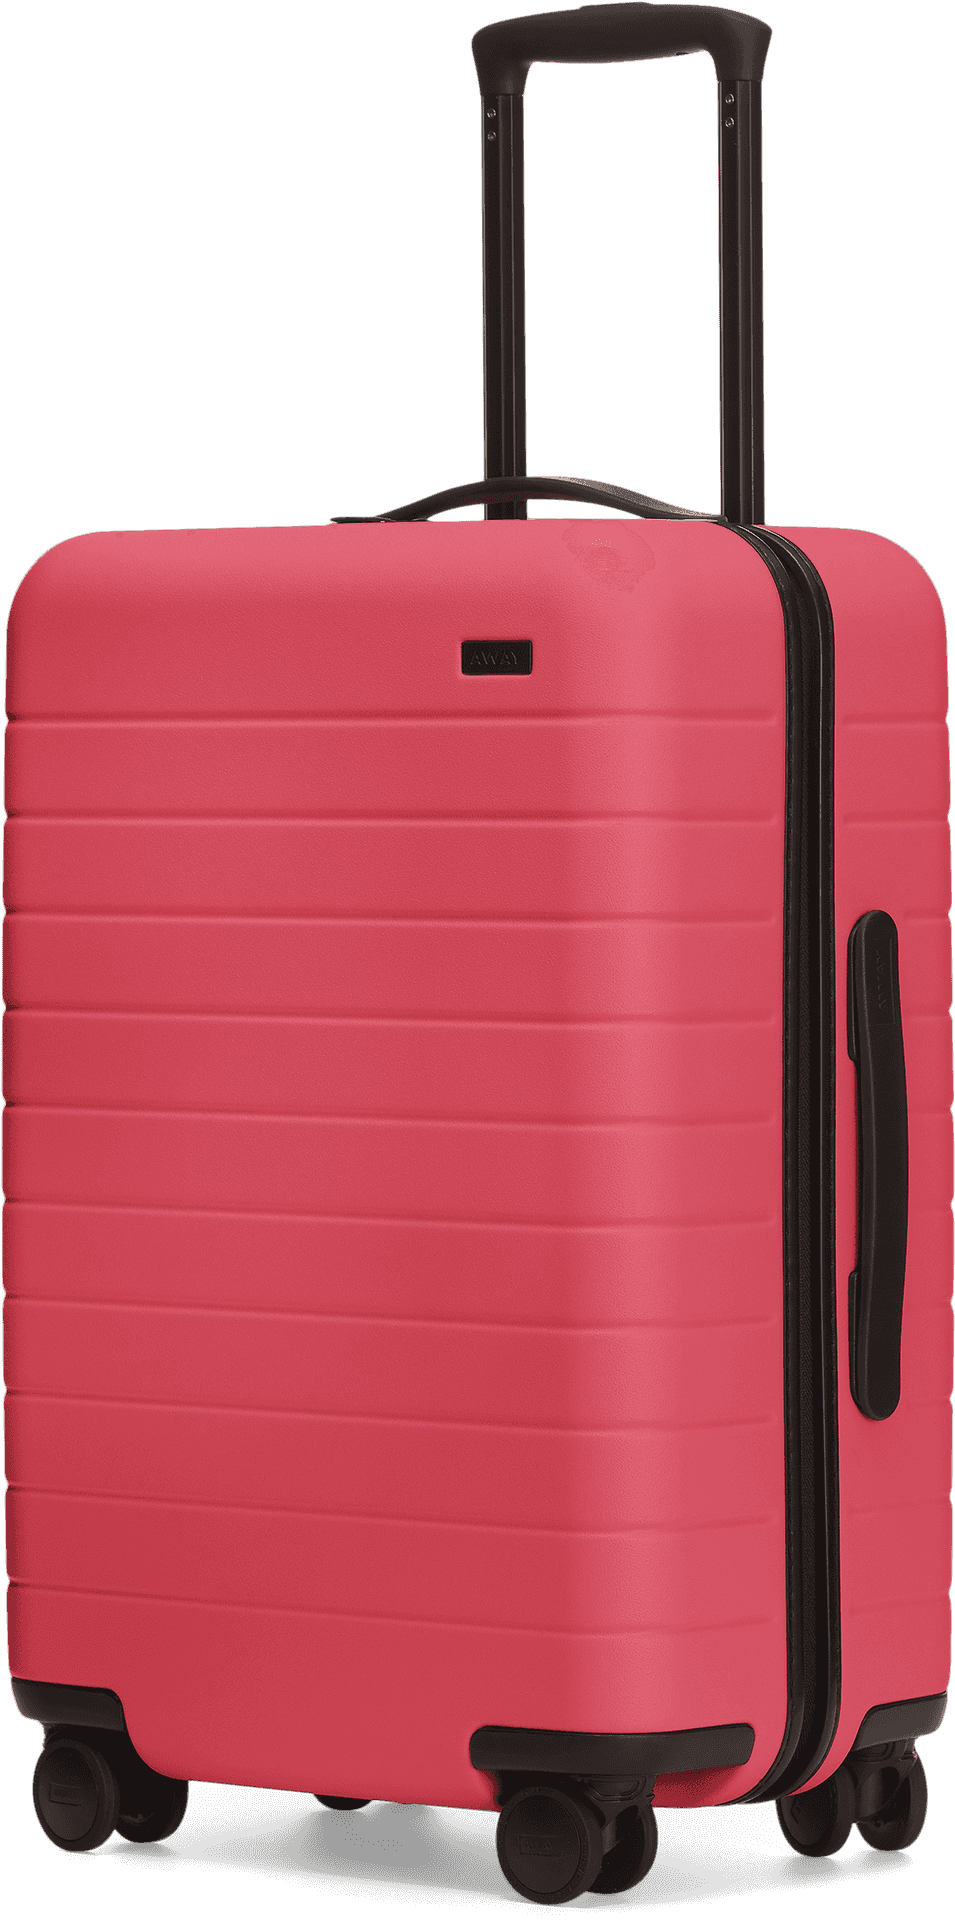 Red Hardshell Suitcase PNG